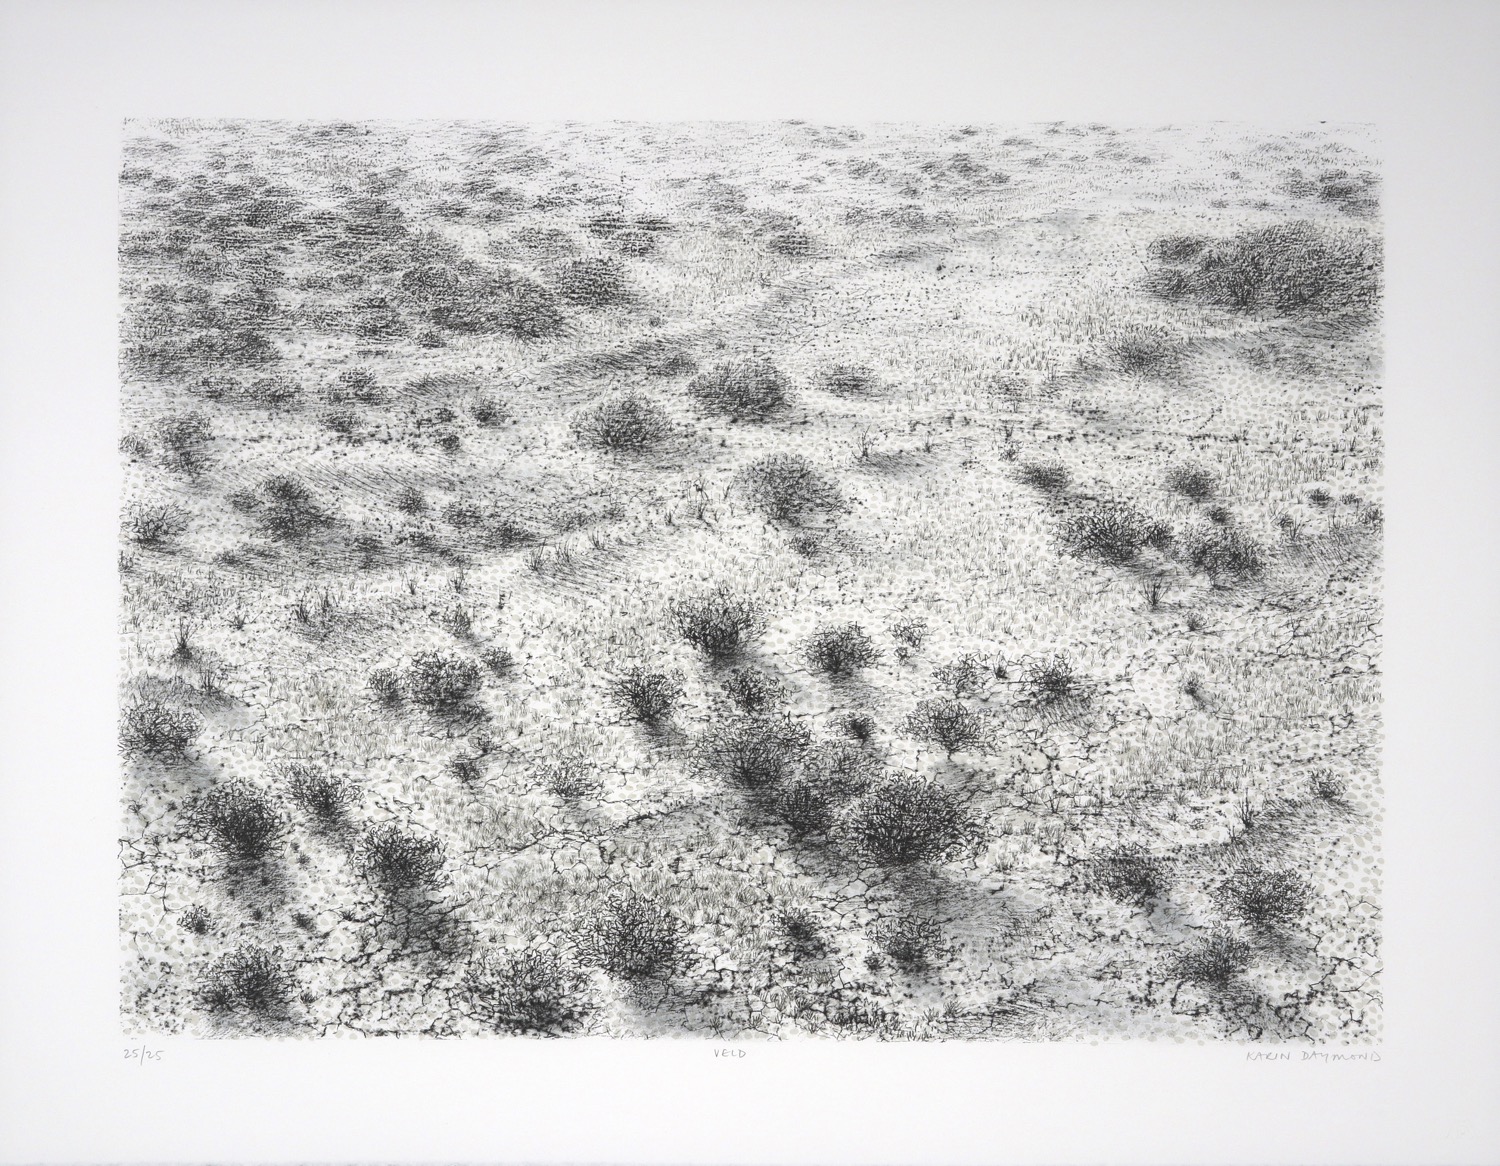 Litho of an aerial view of soft dunes in the Kalahari Desert with sparse plant cover